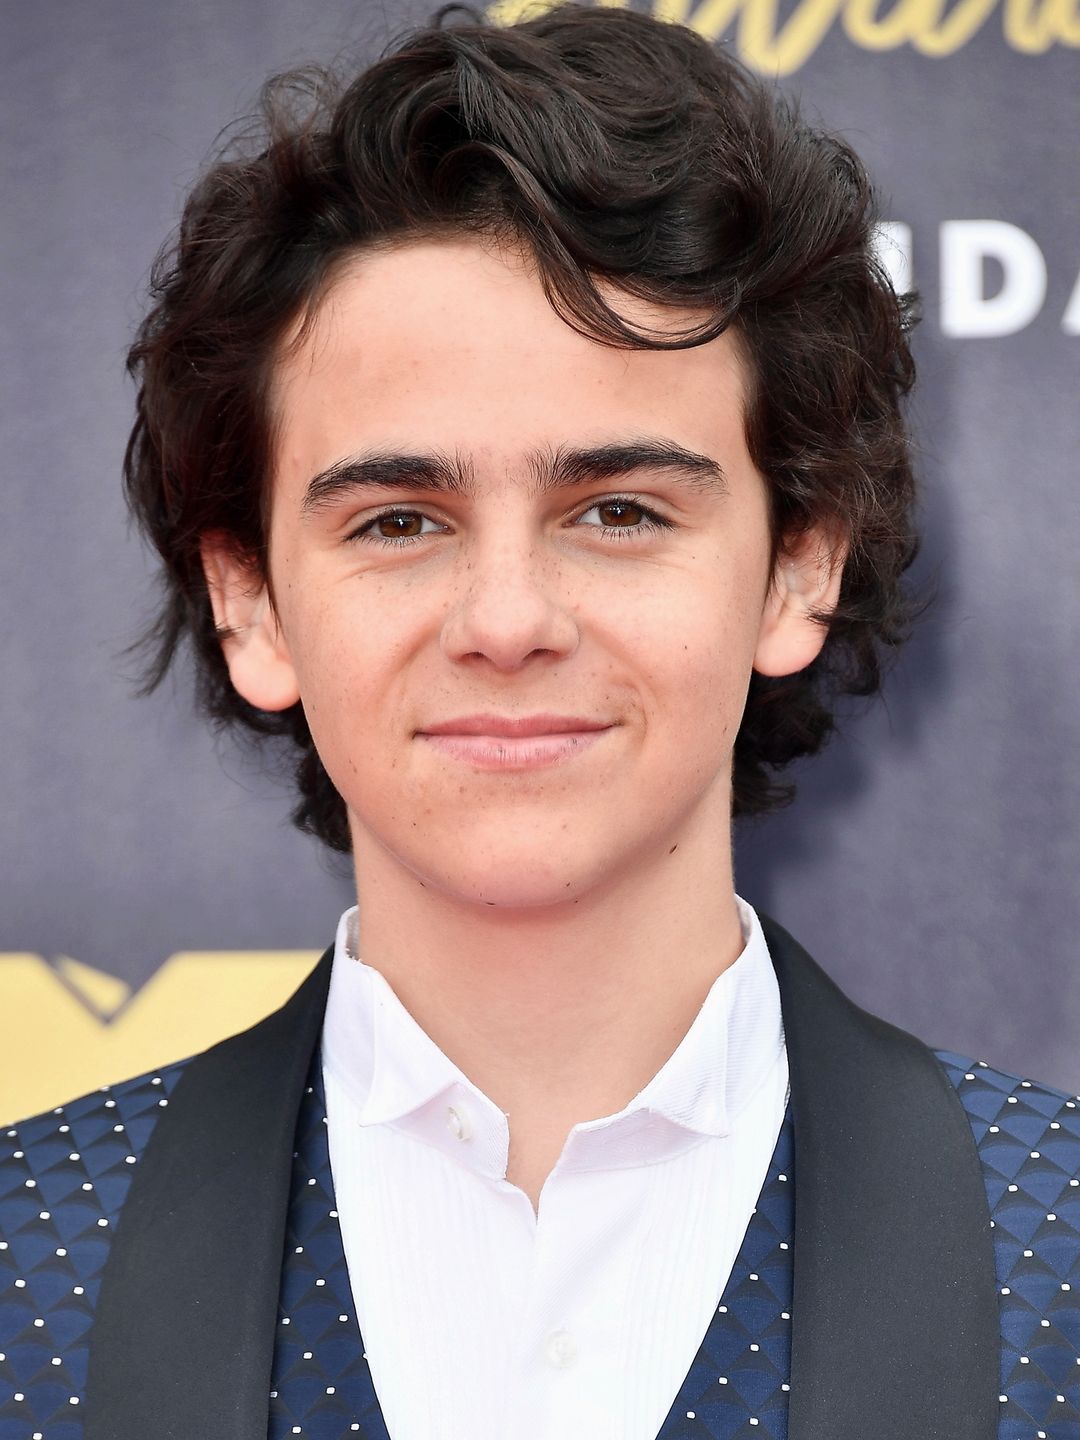 Jack Grazer how did he became famous